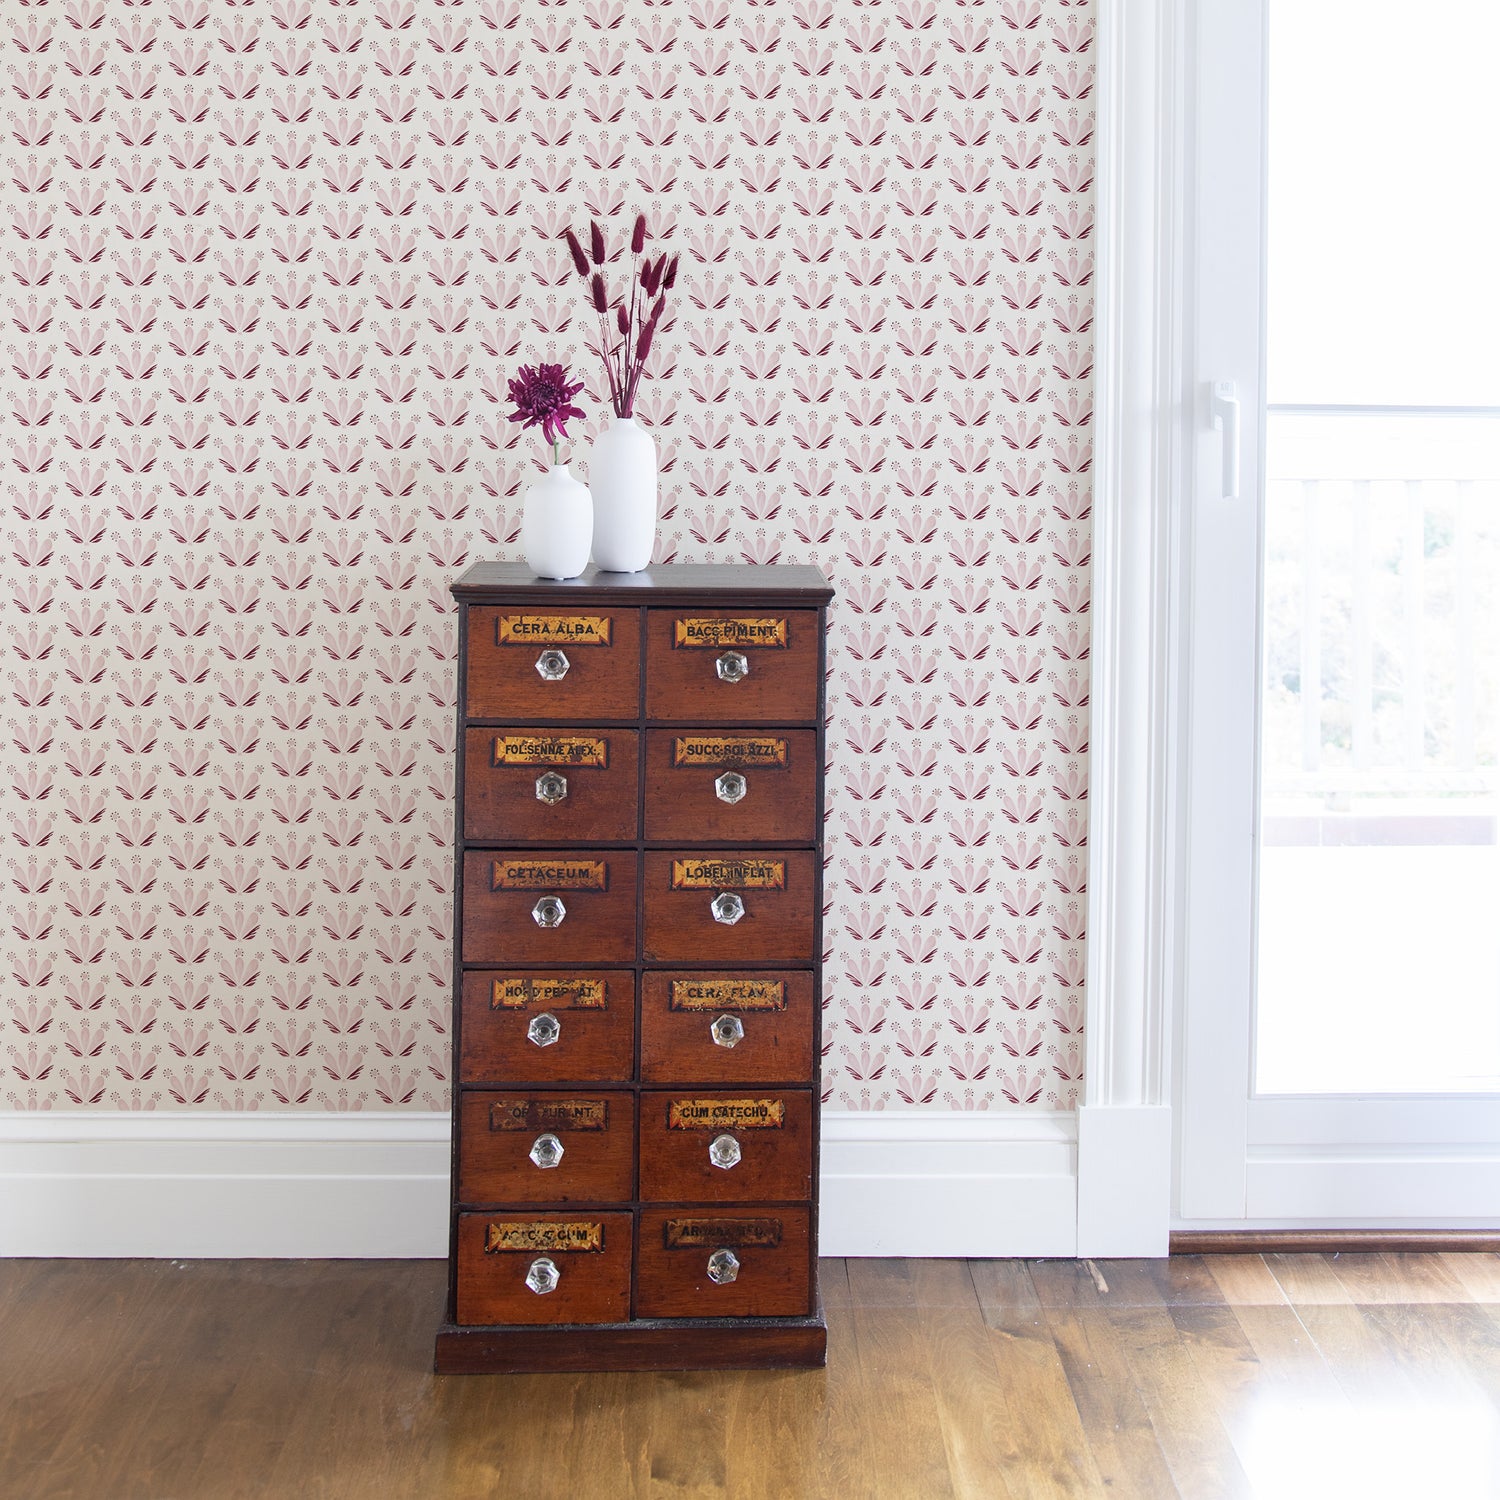 Corner close-up styled with a Pink & Burgundy Drop Repeat Floral Printed Wallpaper behind wooden cabinet with two white vases with pink flowers inside